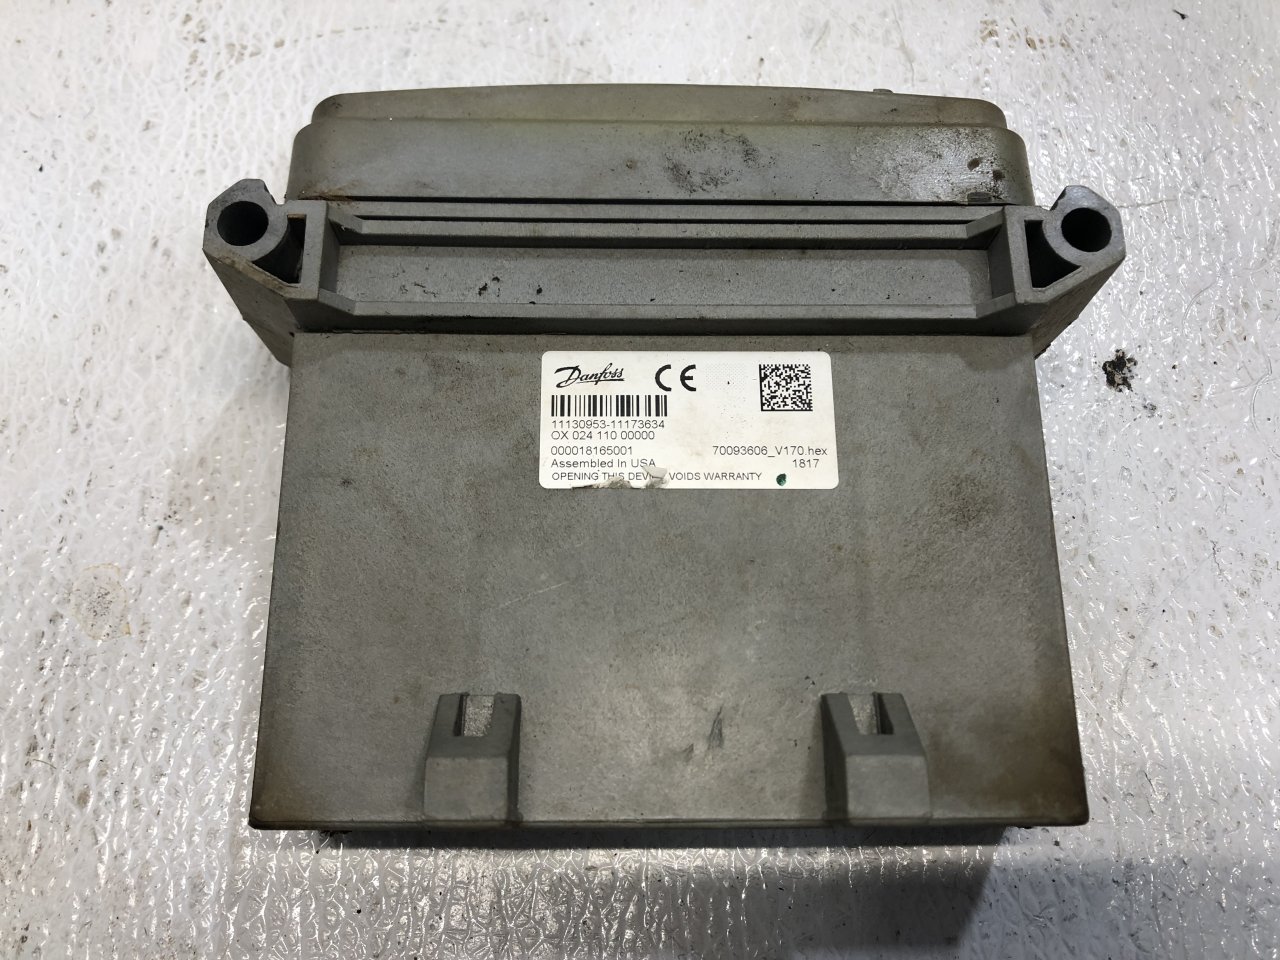 ASV RT120 Forestry Electrical, Misc. Parts - OX 024 110 00000